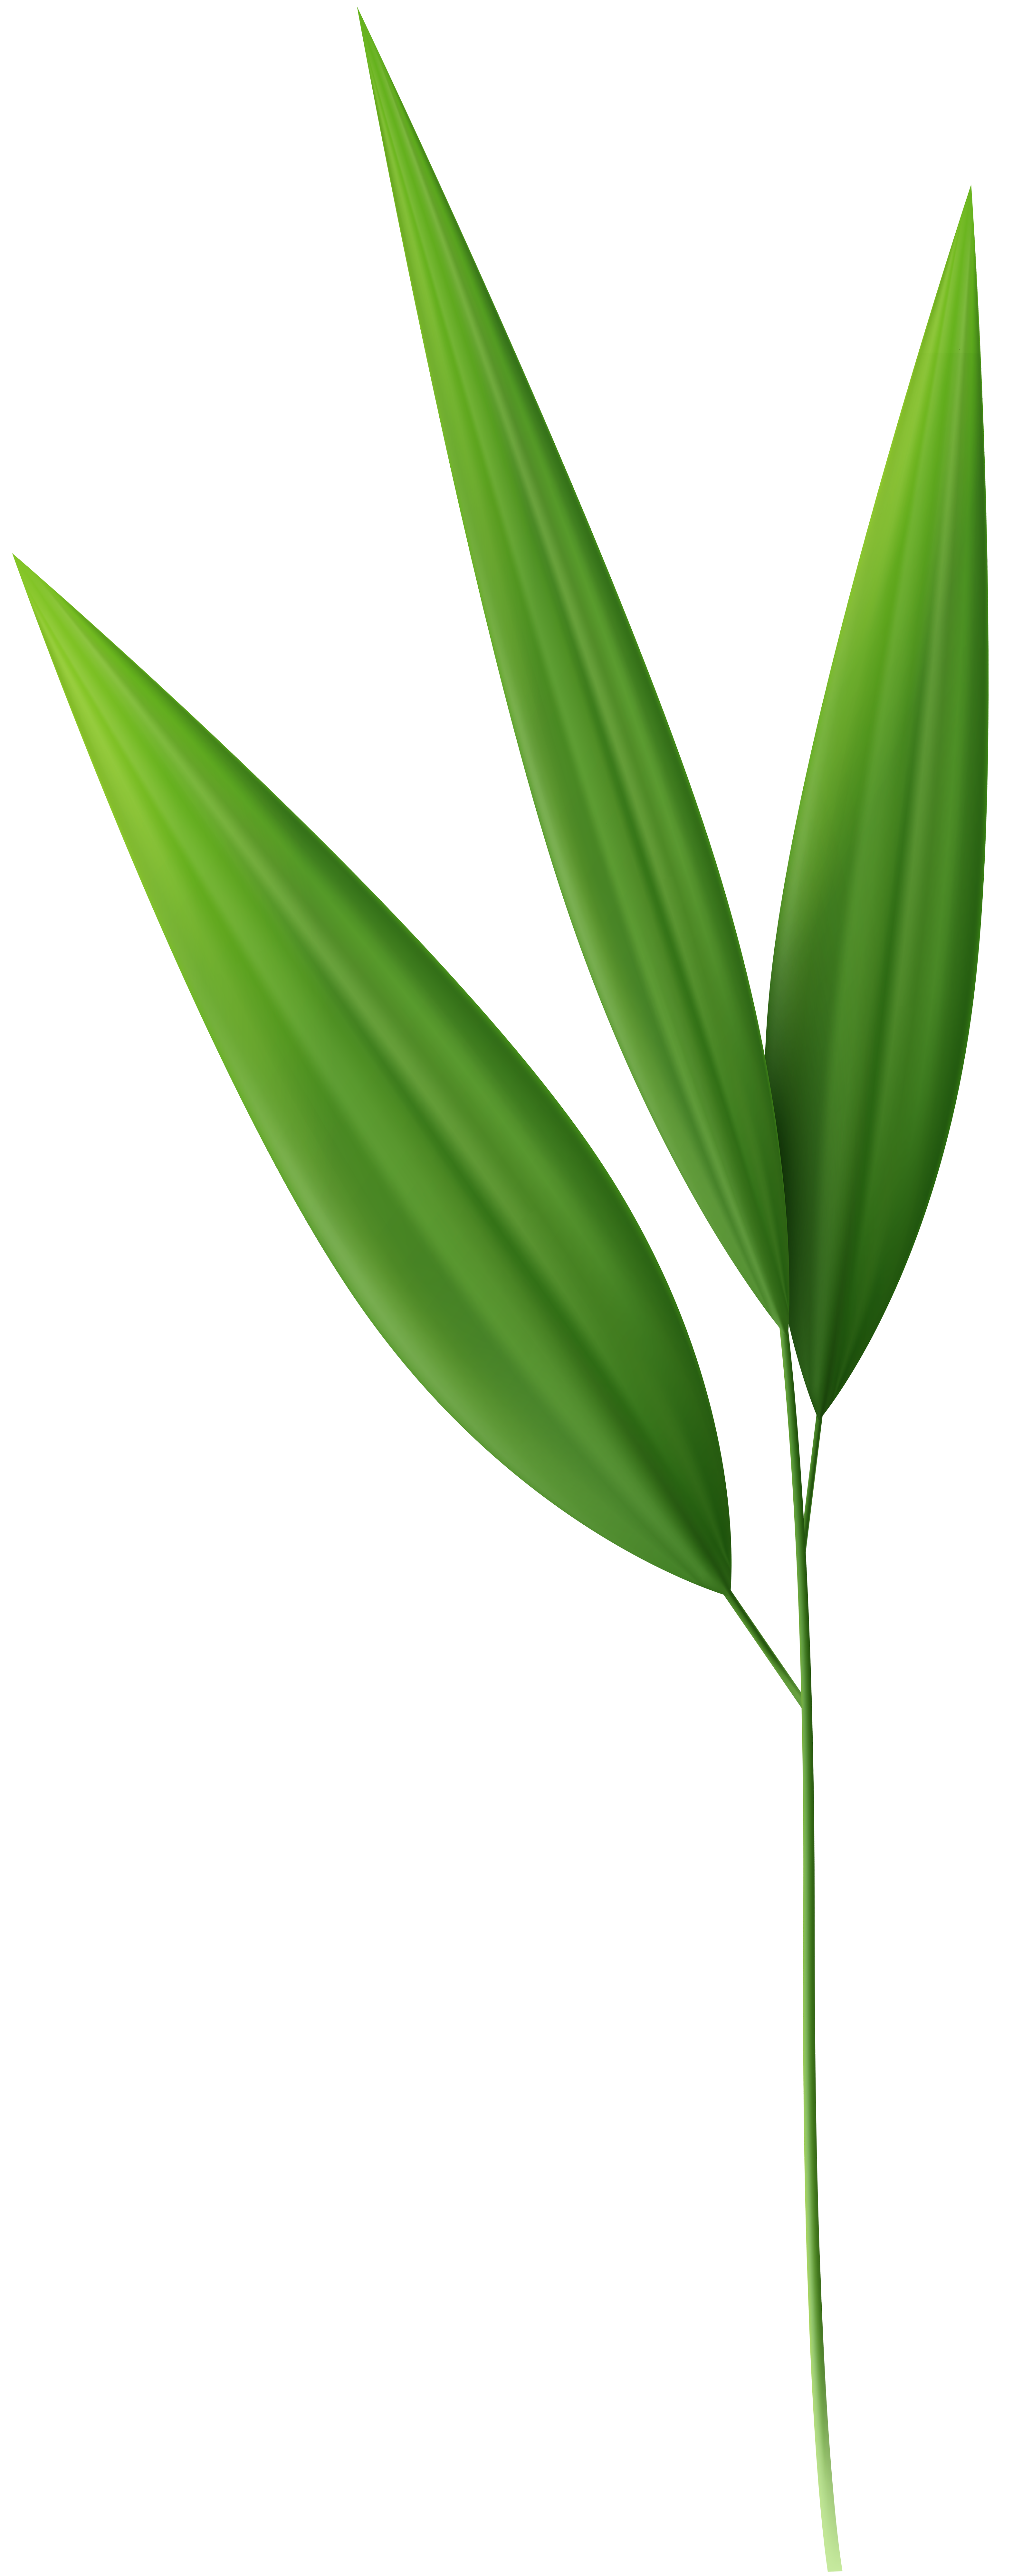 Bamboo Leaves Png Clipart Gallery Yopriceville High Quality Images And Transparent Png Free Clipart